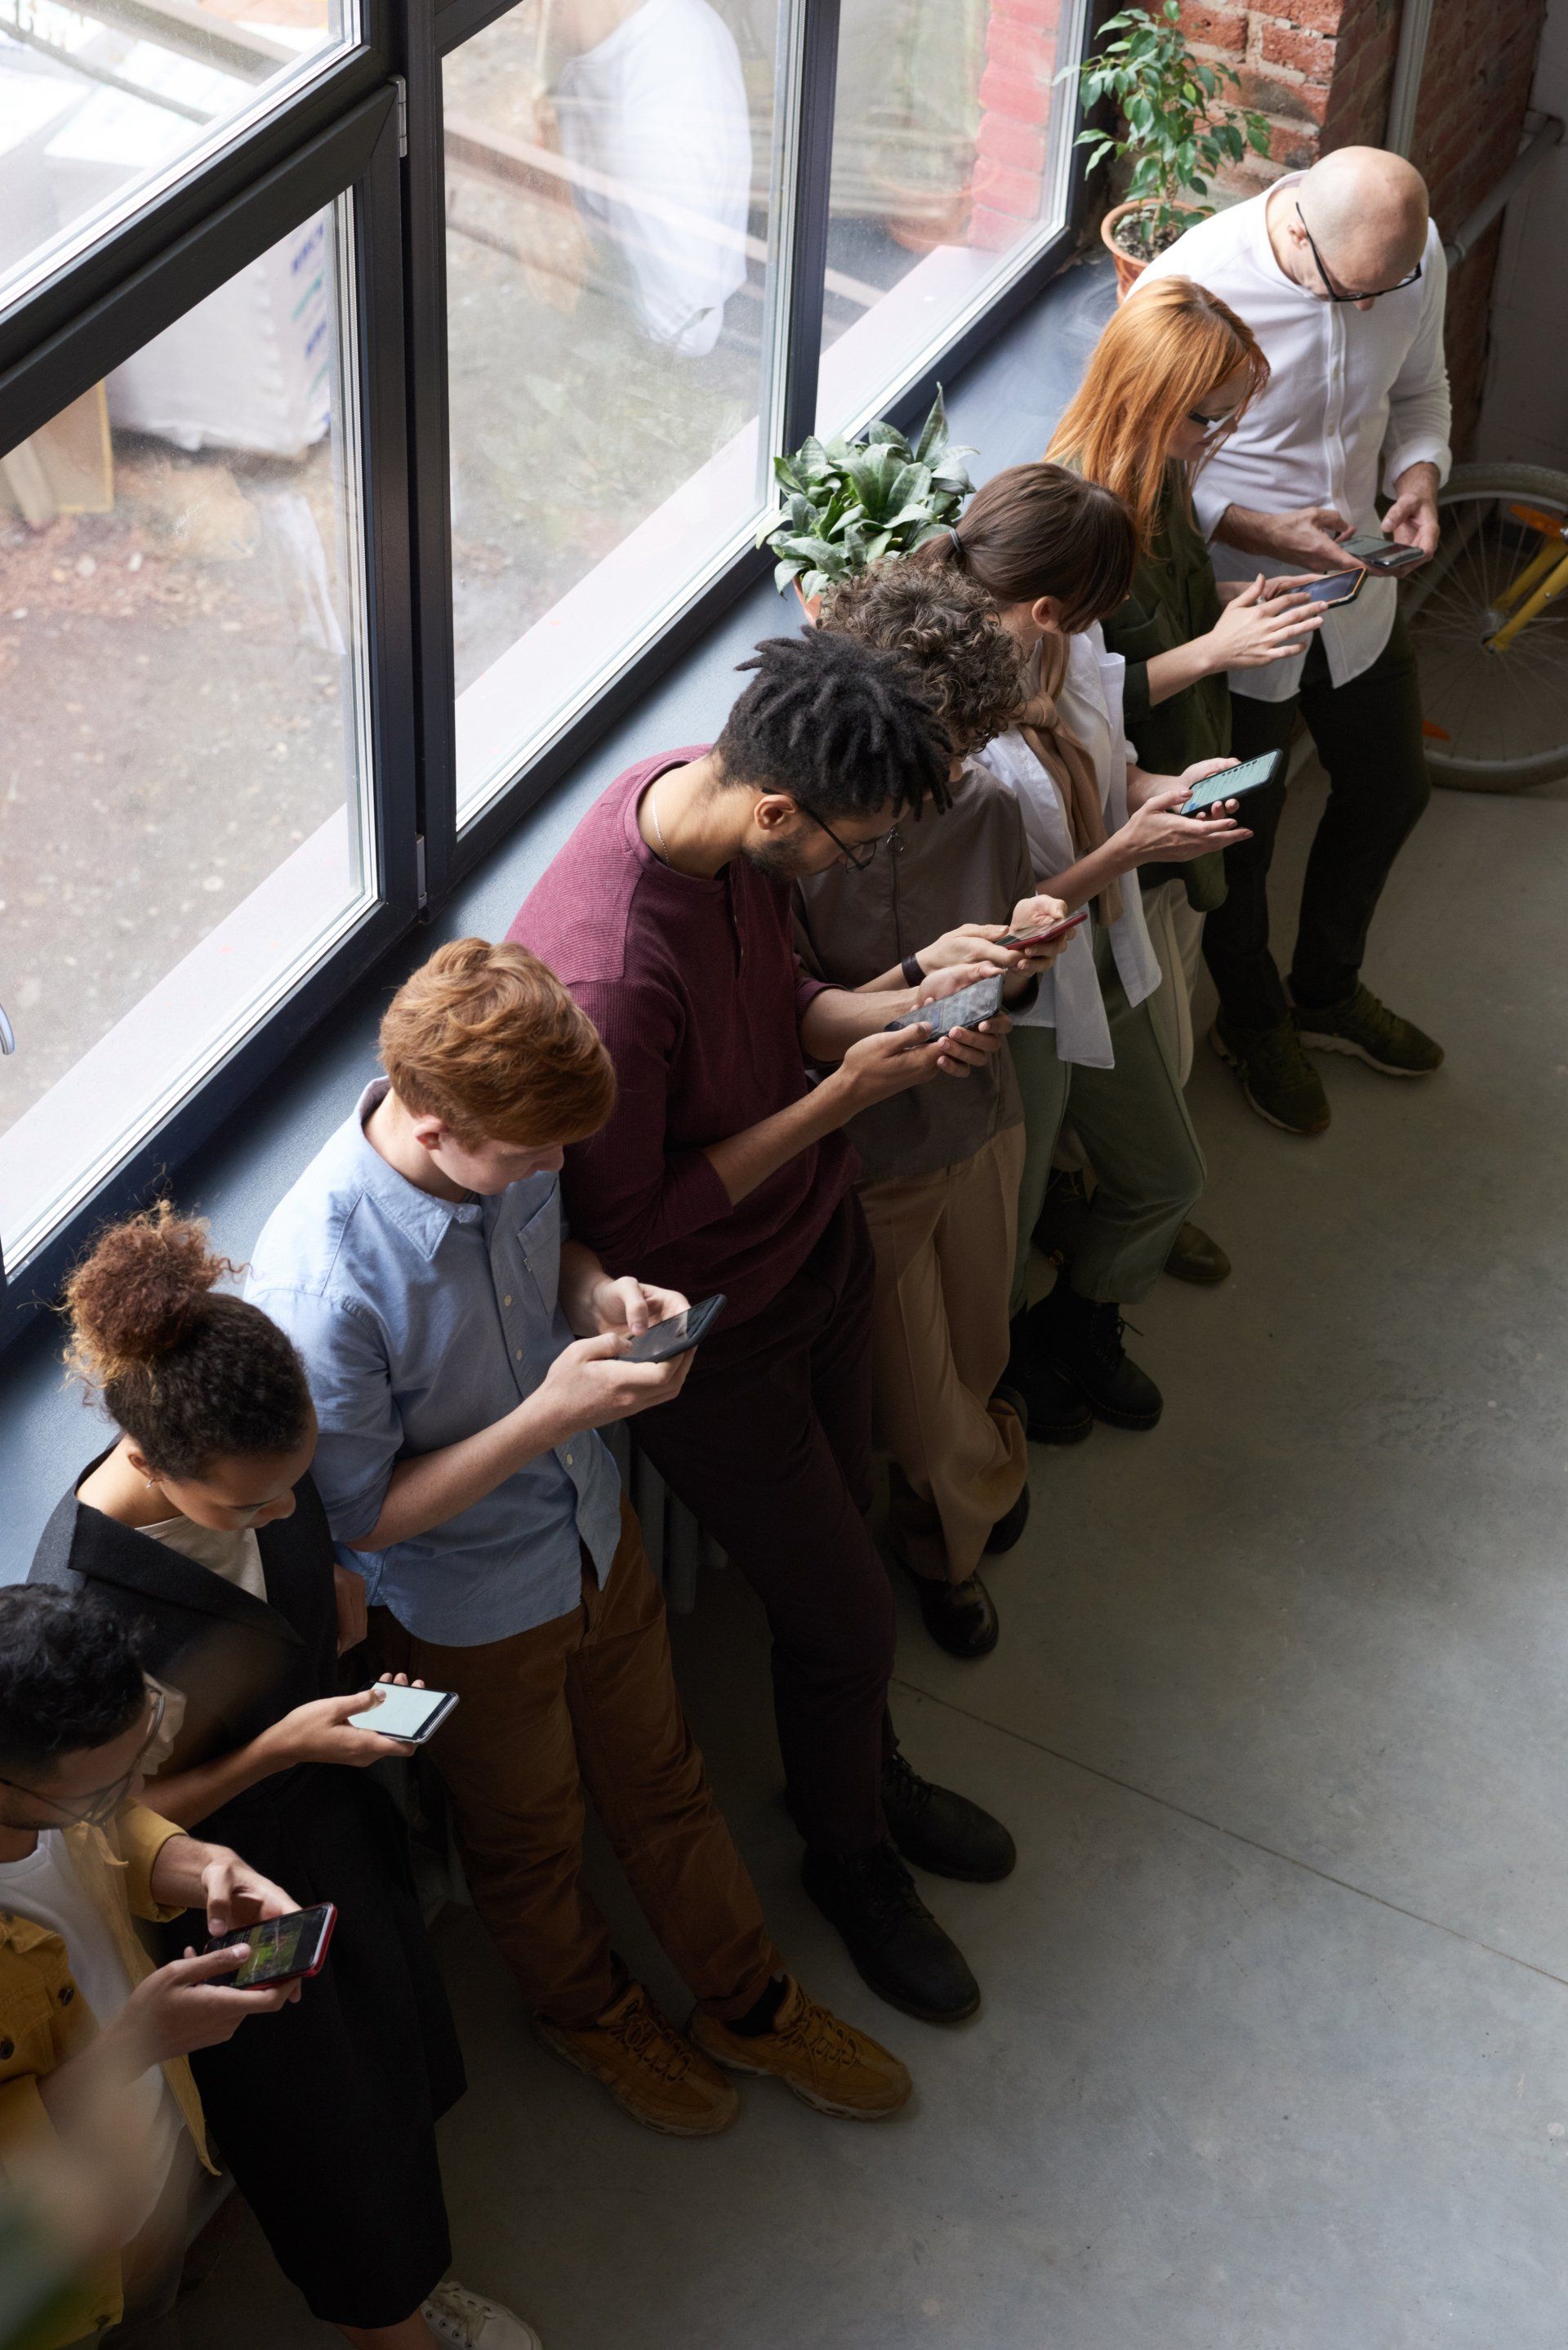 A group of people are standing in a line looking at their phones.